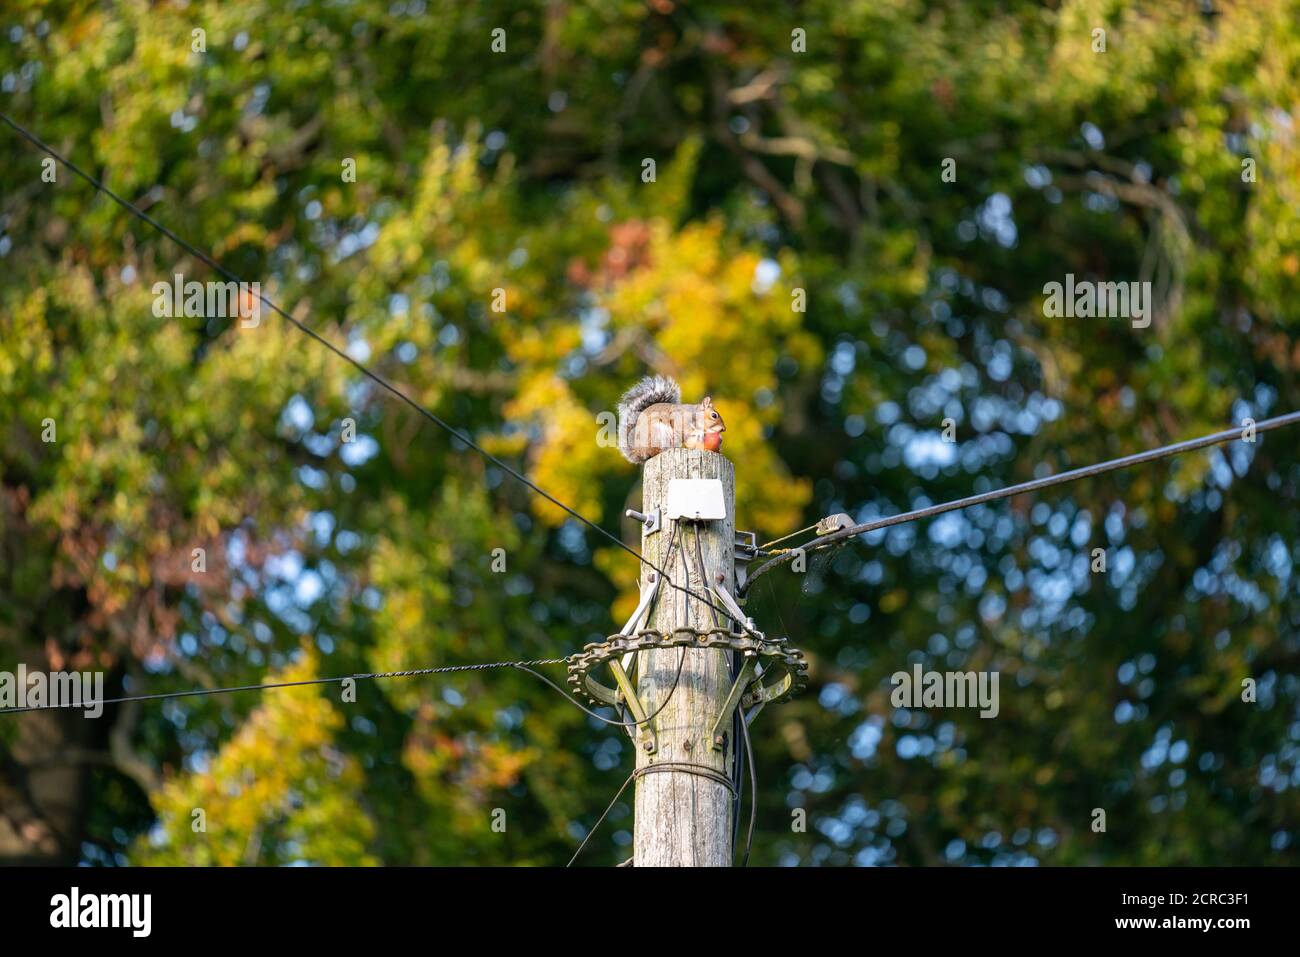 Female Sow Squirrel Feeding on Apple on top of Telegraph Pole Stock Photo